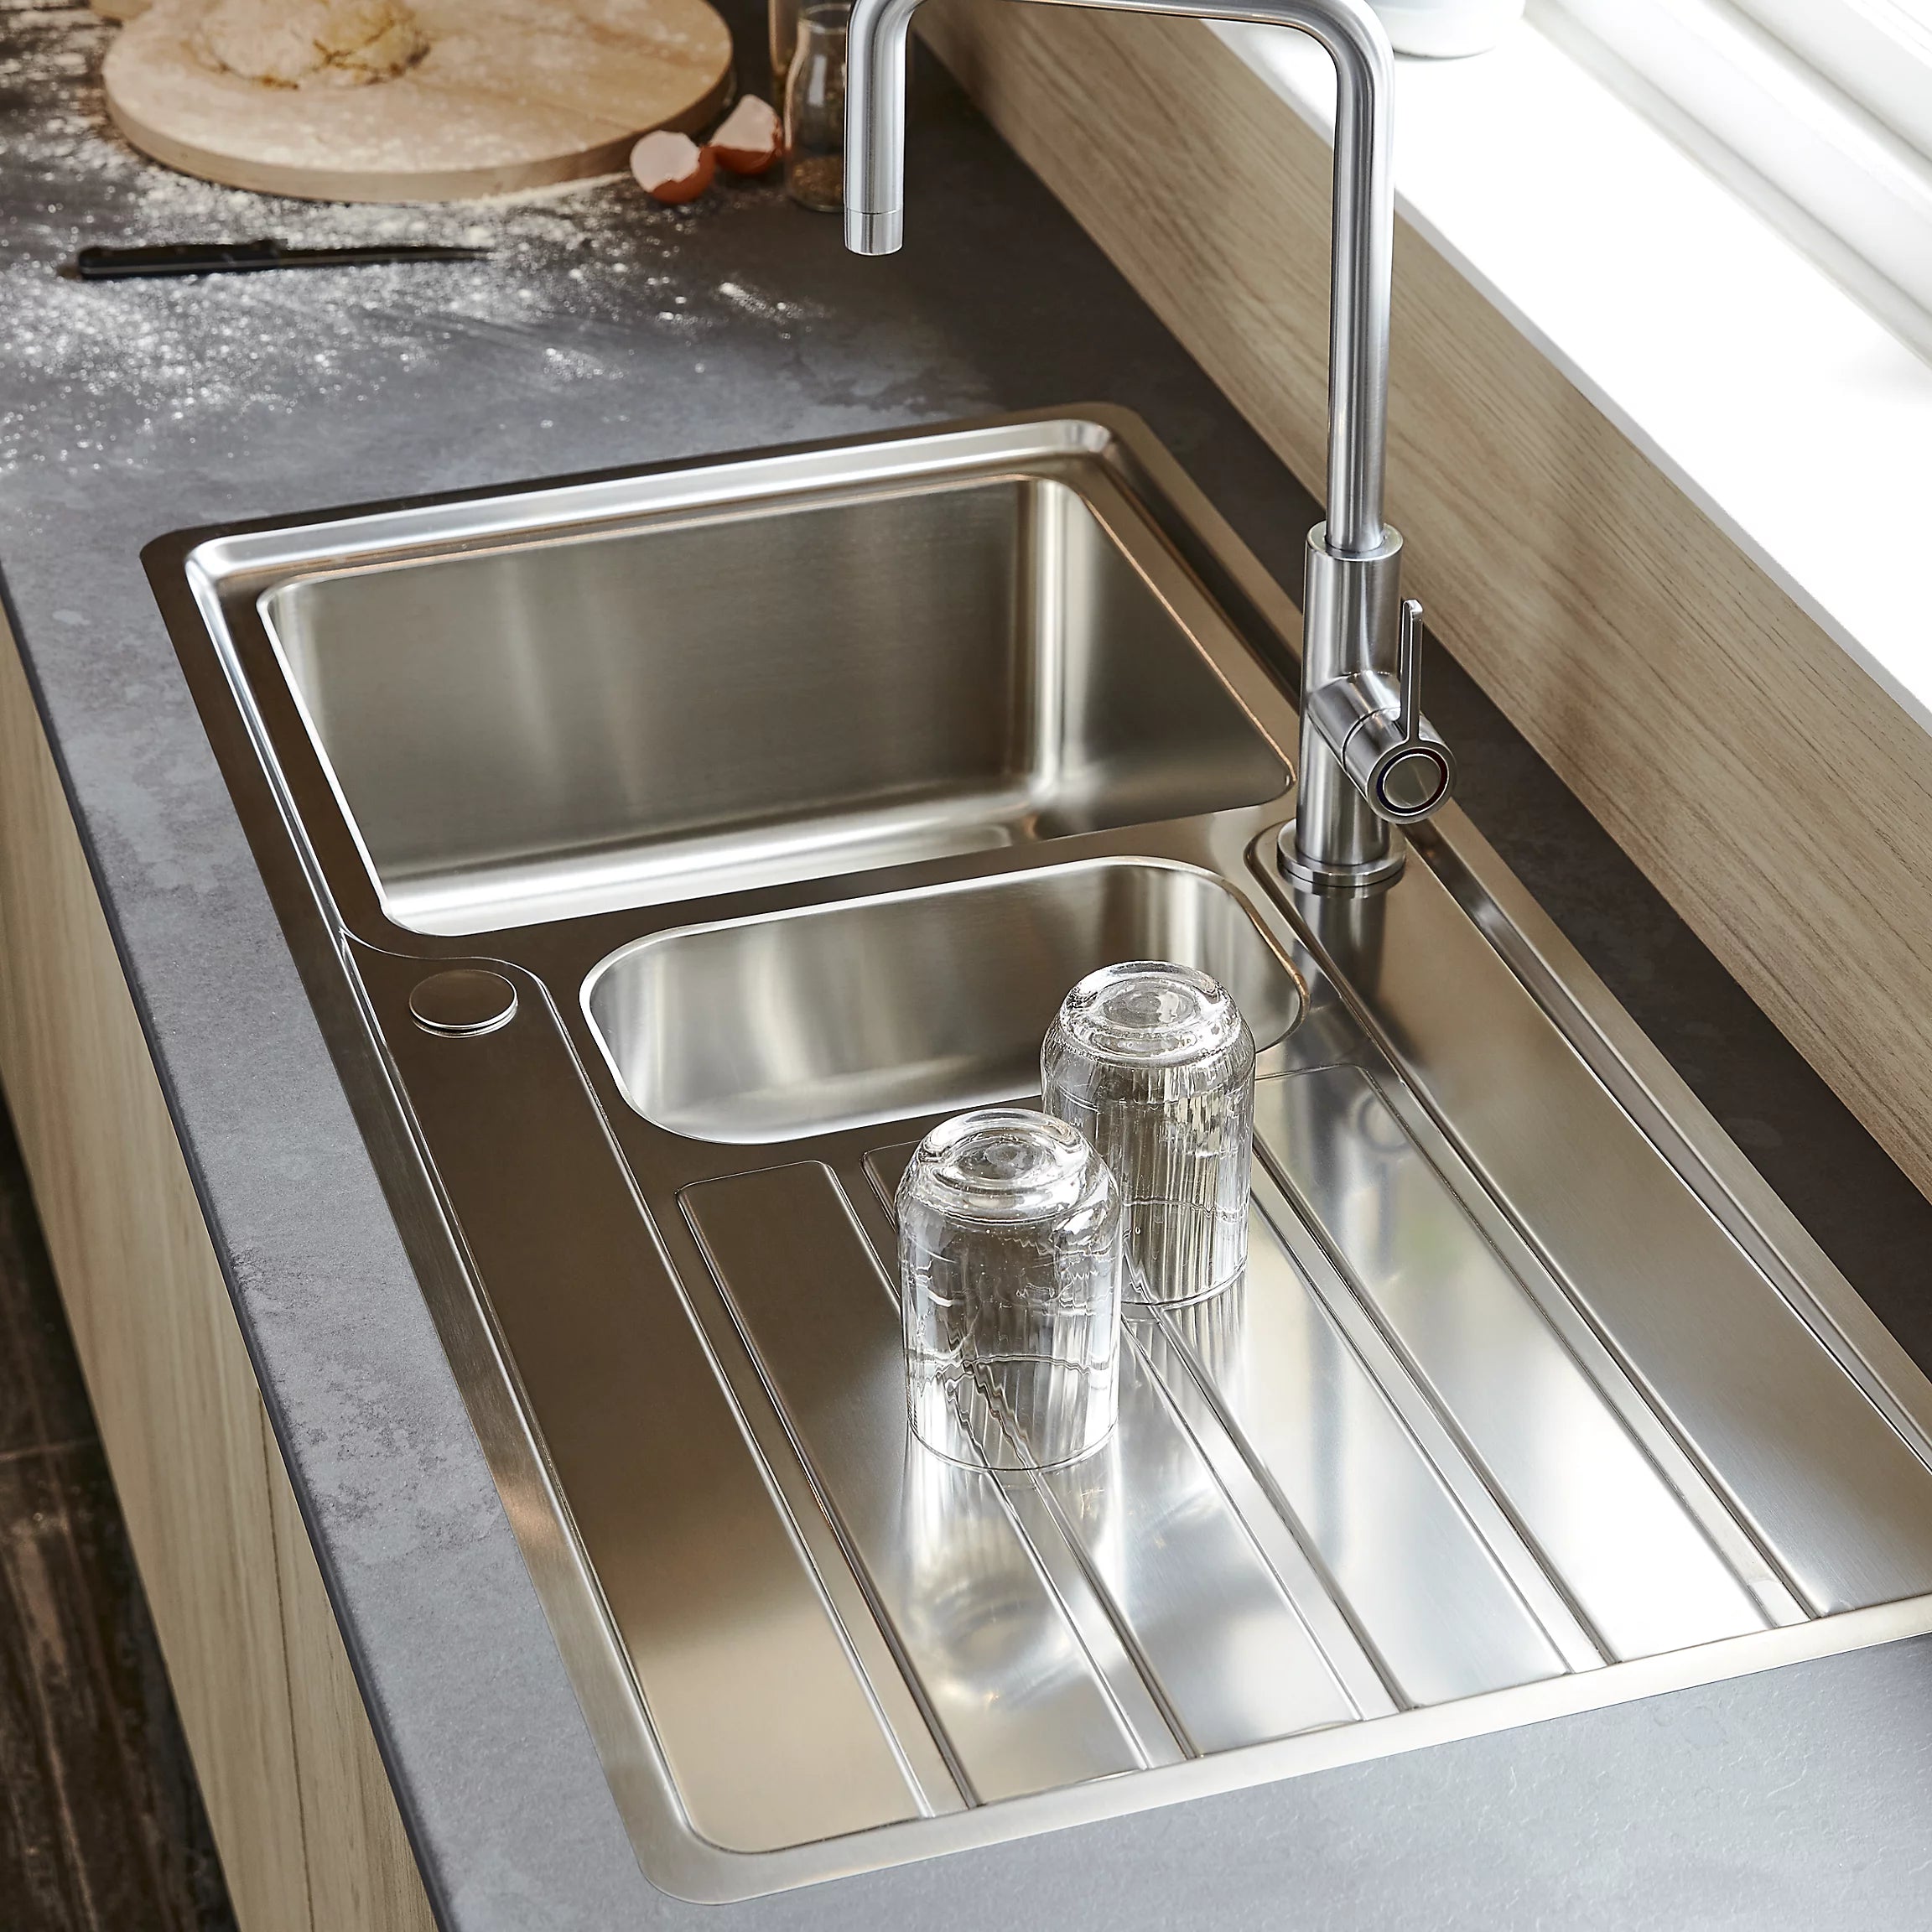 Cooke & Lewis Apollonia Brushed Stainless steel 1.5 Bowl Sink & drainer W50cm x L100cm 7744